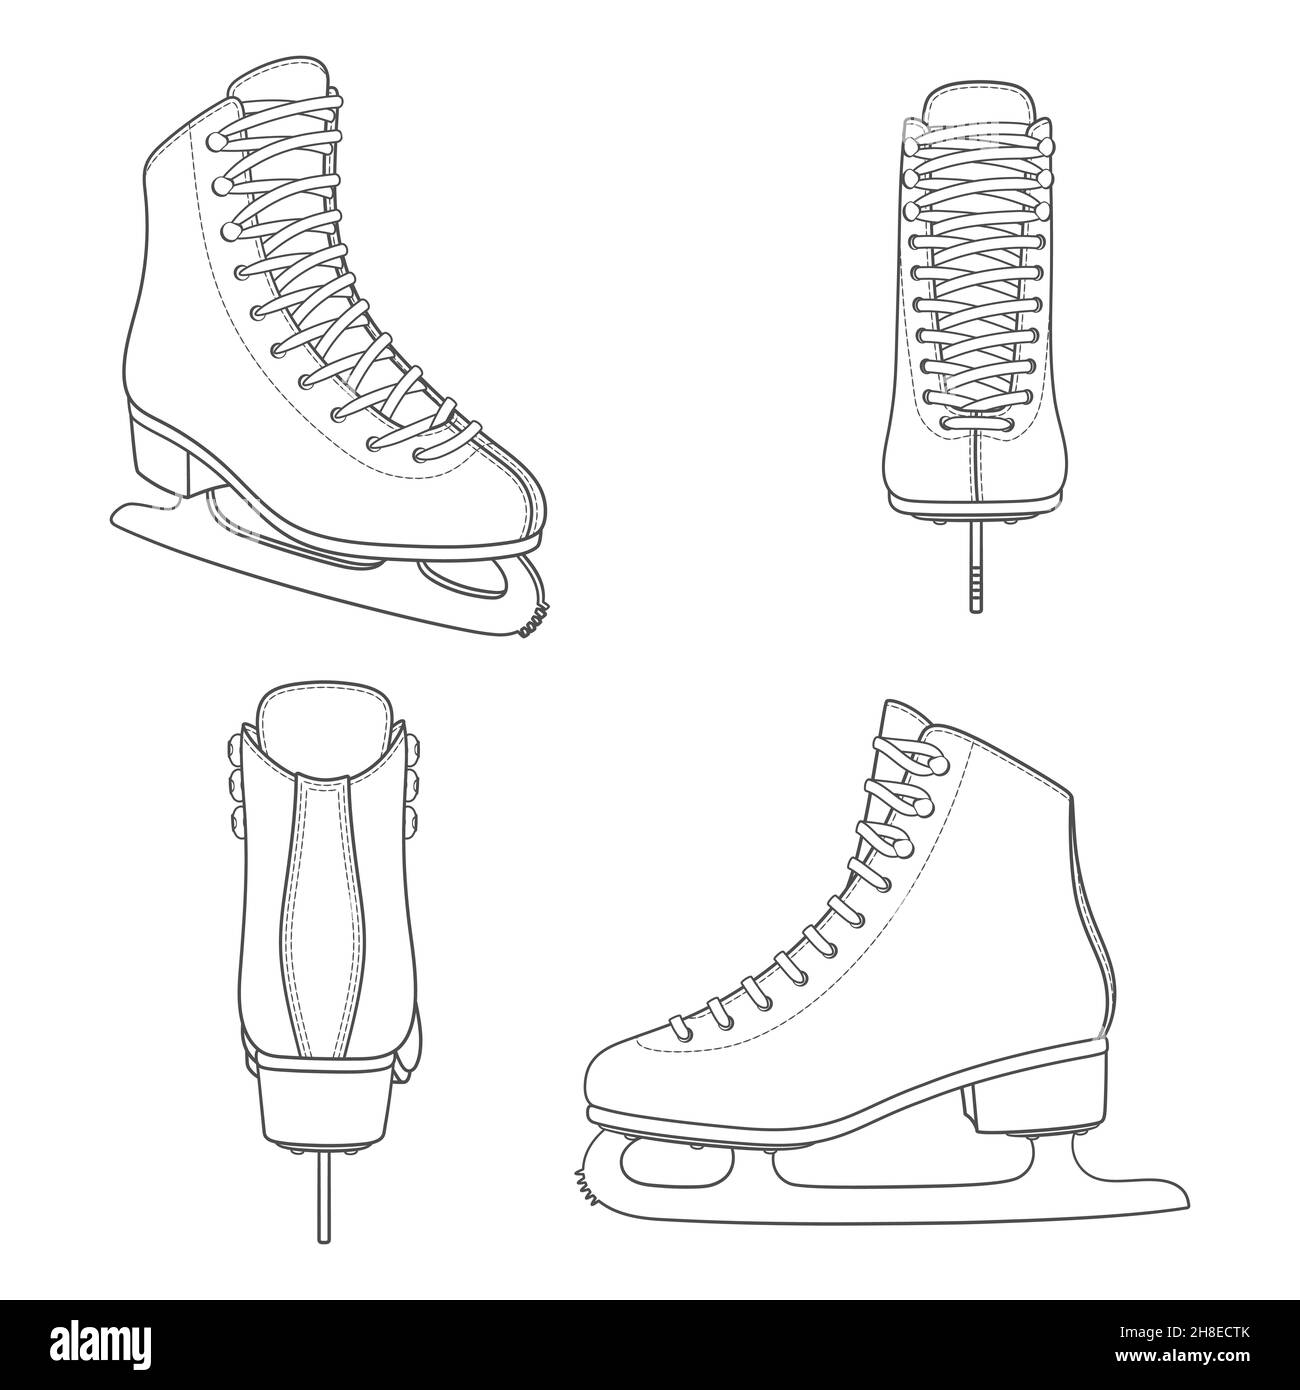 Set of black and white images with skates for figure skating. Isolated vector objects on a white background. Stock Vector